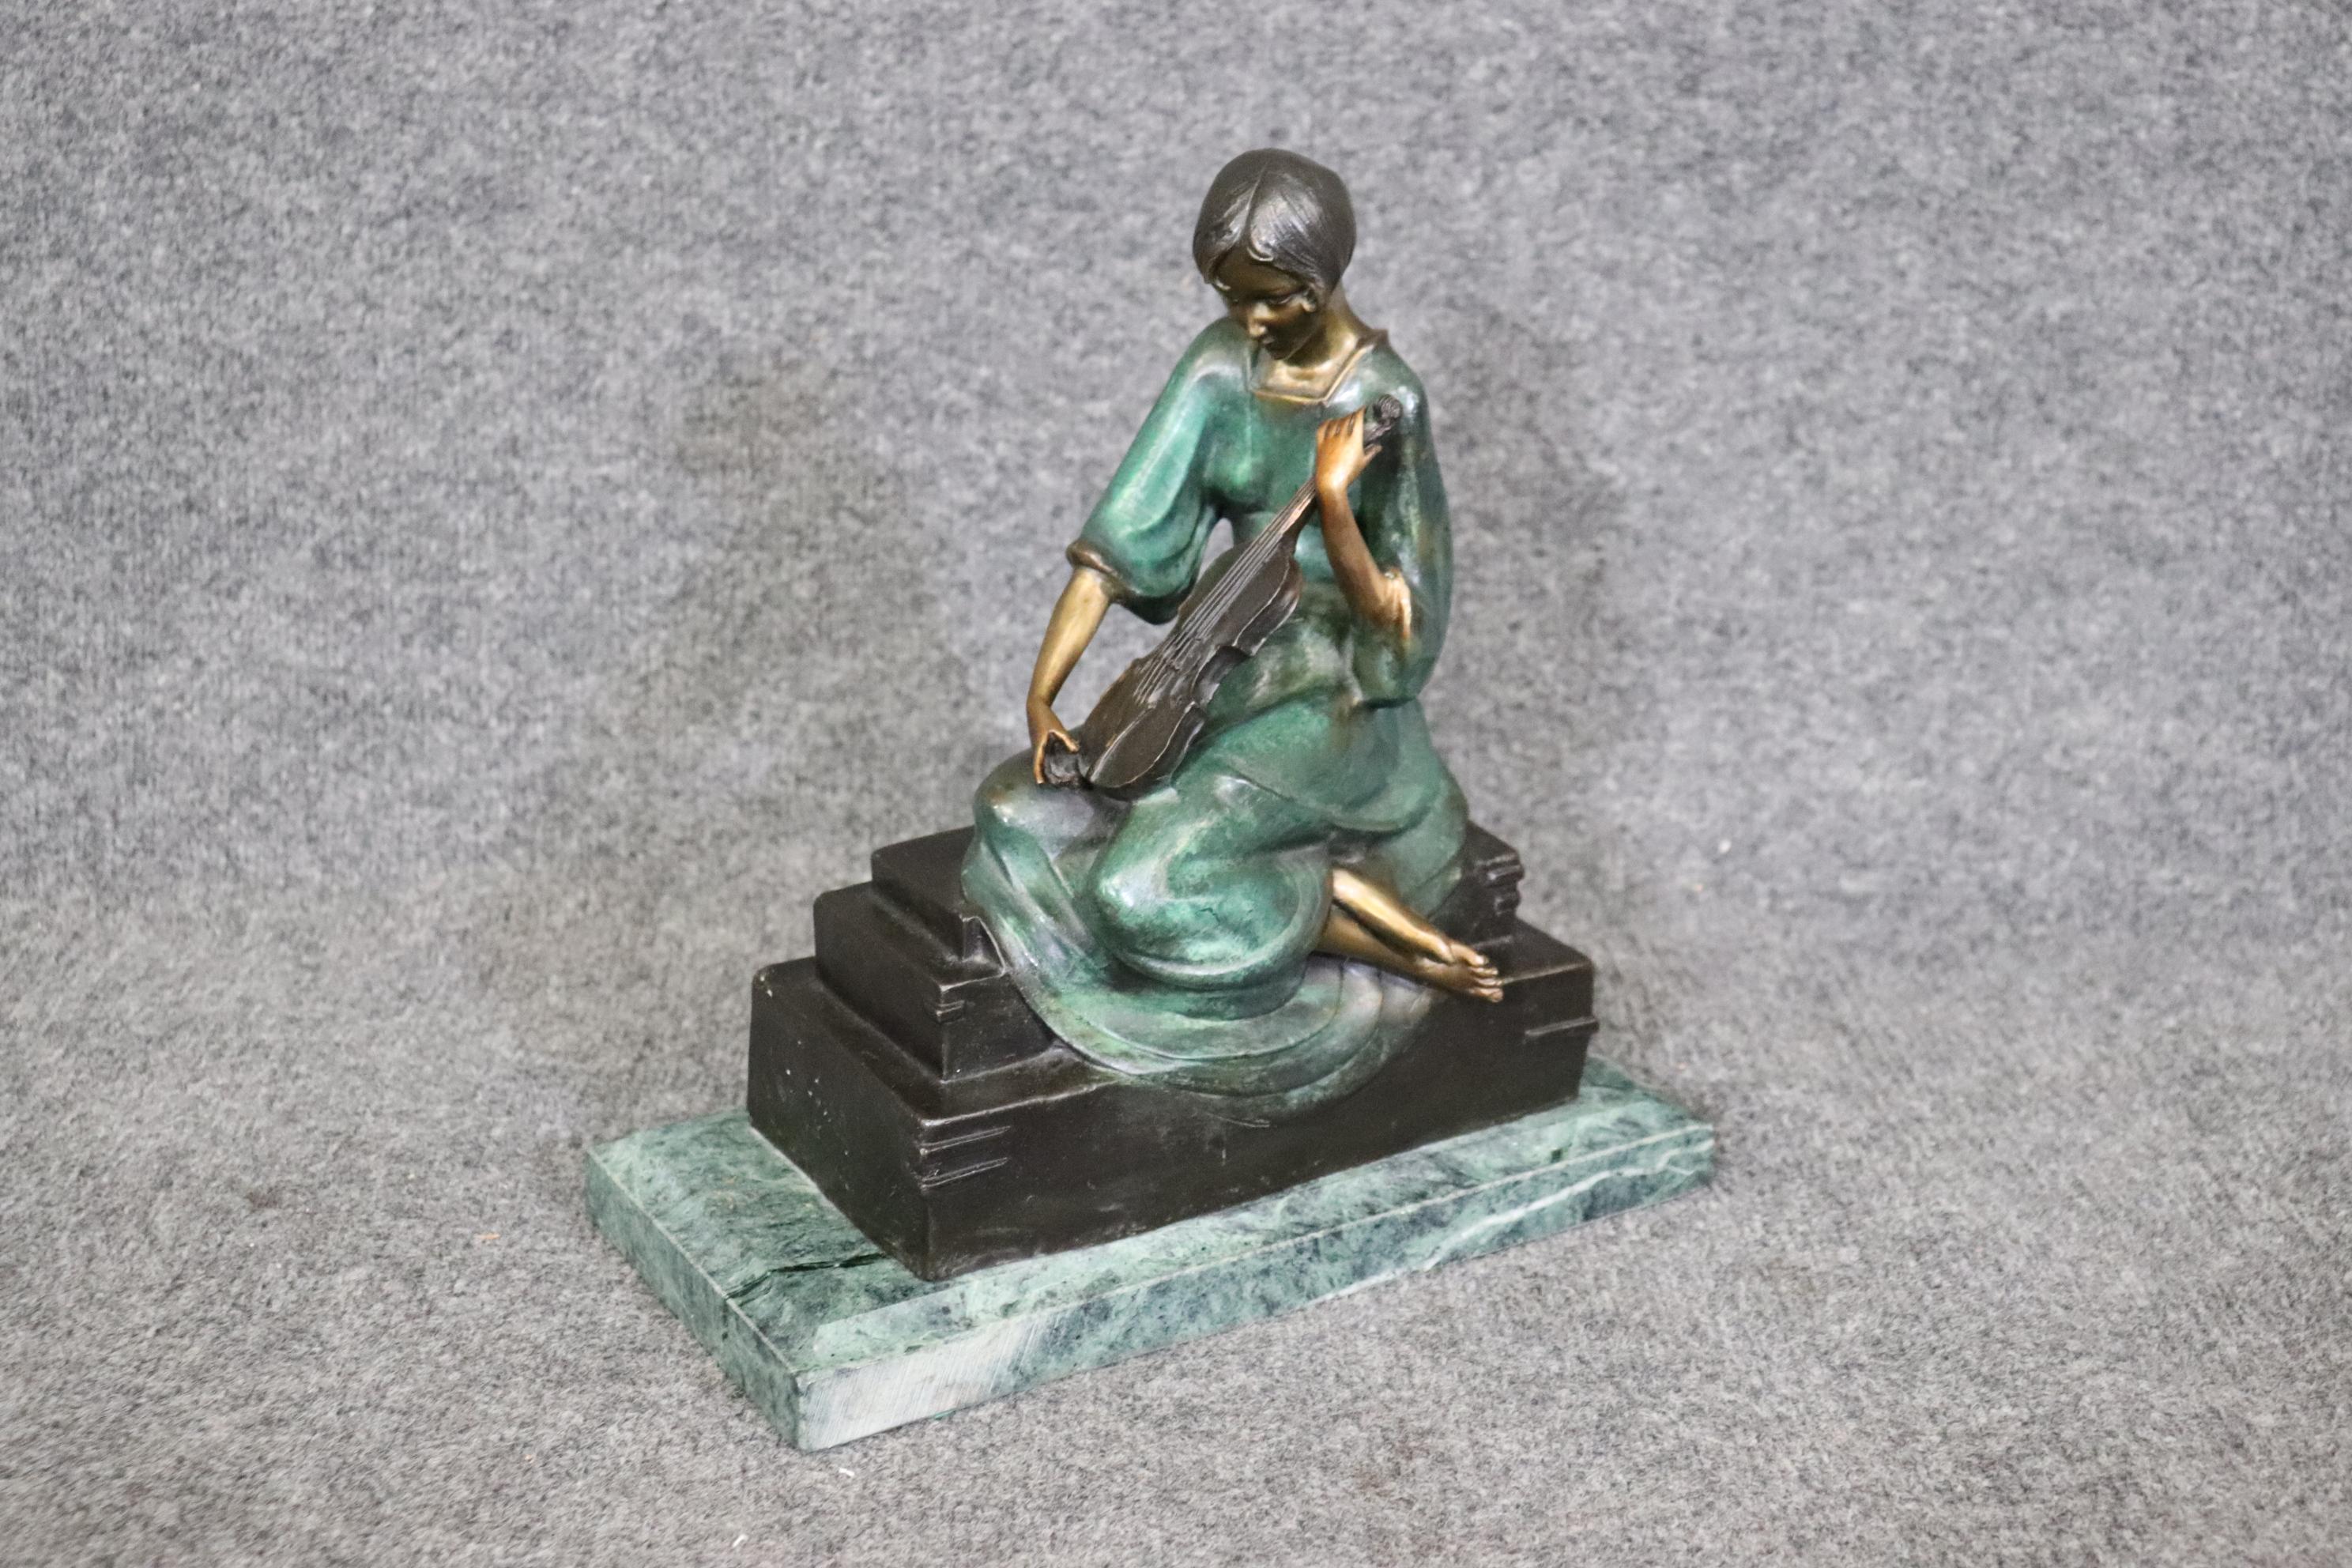 Dimensions- H: 12 1/2in W: 12in D: 6in 

This Art Deco bronze statue of a woman with a violin is made of the highest quality! This piece is signed Philippe. Paul Philippe (1870–1930) was a French sculptor who worked during the late 19th and early